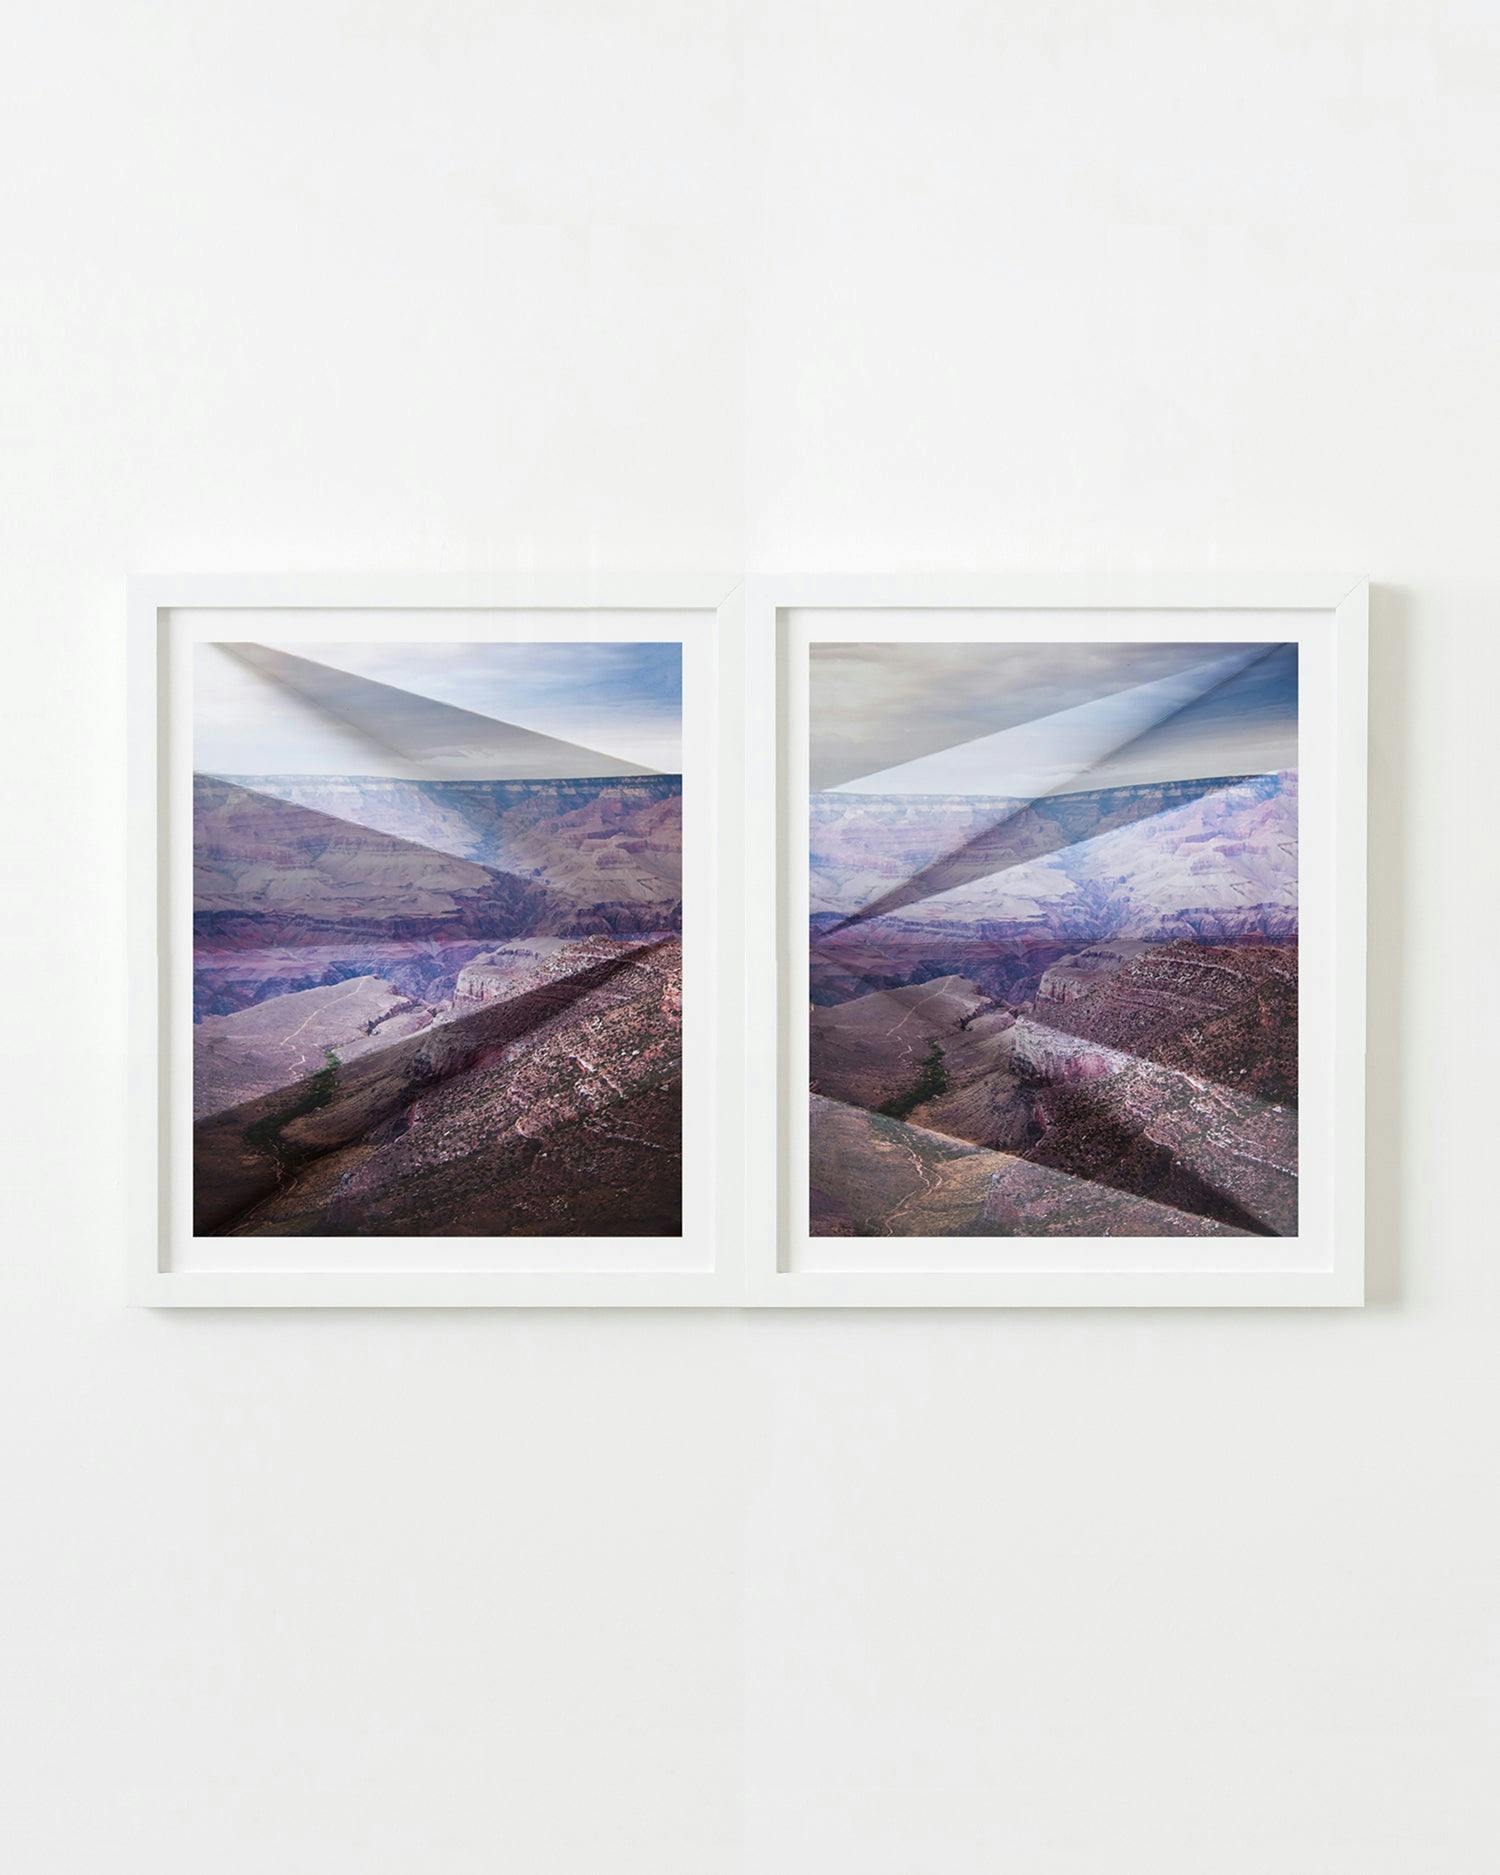 Photography by Millee Tibbs titled "Mountains + Valleys (Grand Canyon, South Rim, Diptych)".